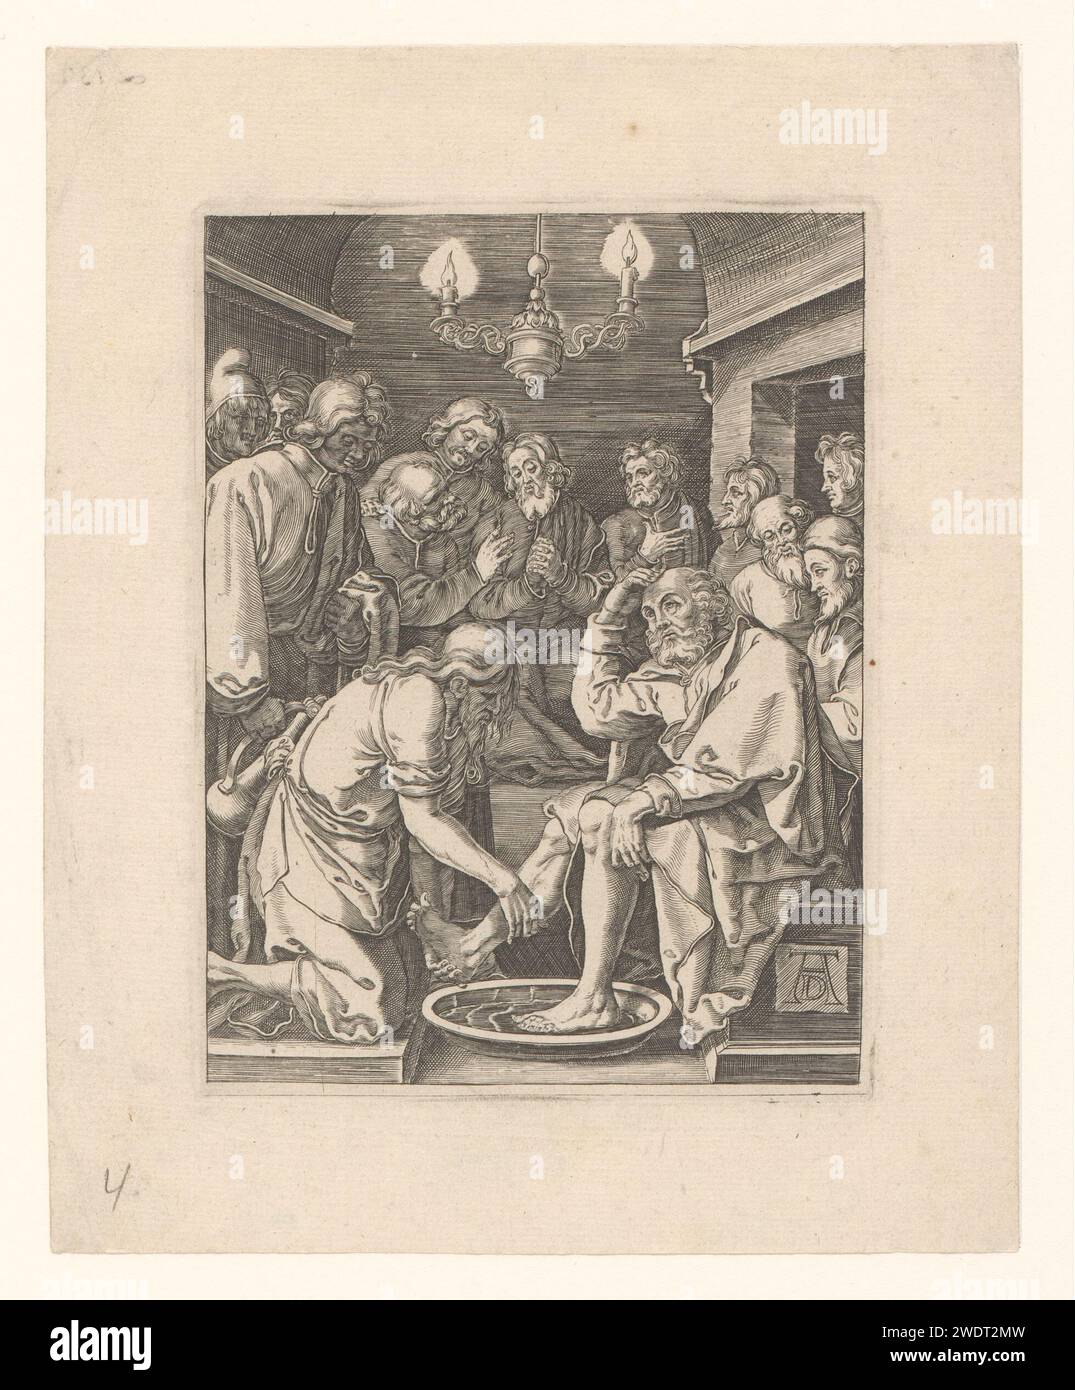 Voetwassing, anonymous, Albrecht Dürer, 1550 - 1600 print   paper engraving Christ washes Peter's feet Stock Photo